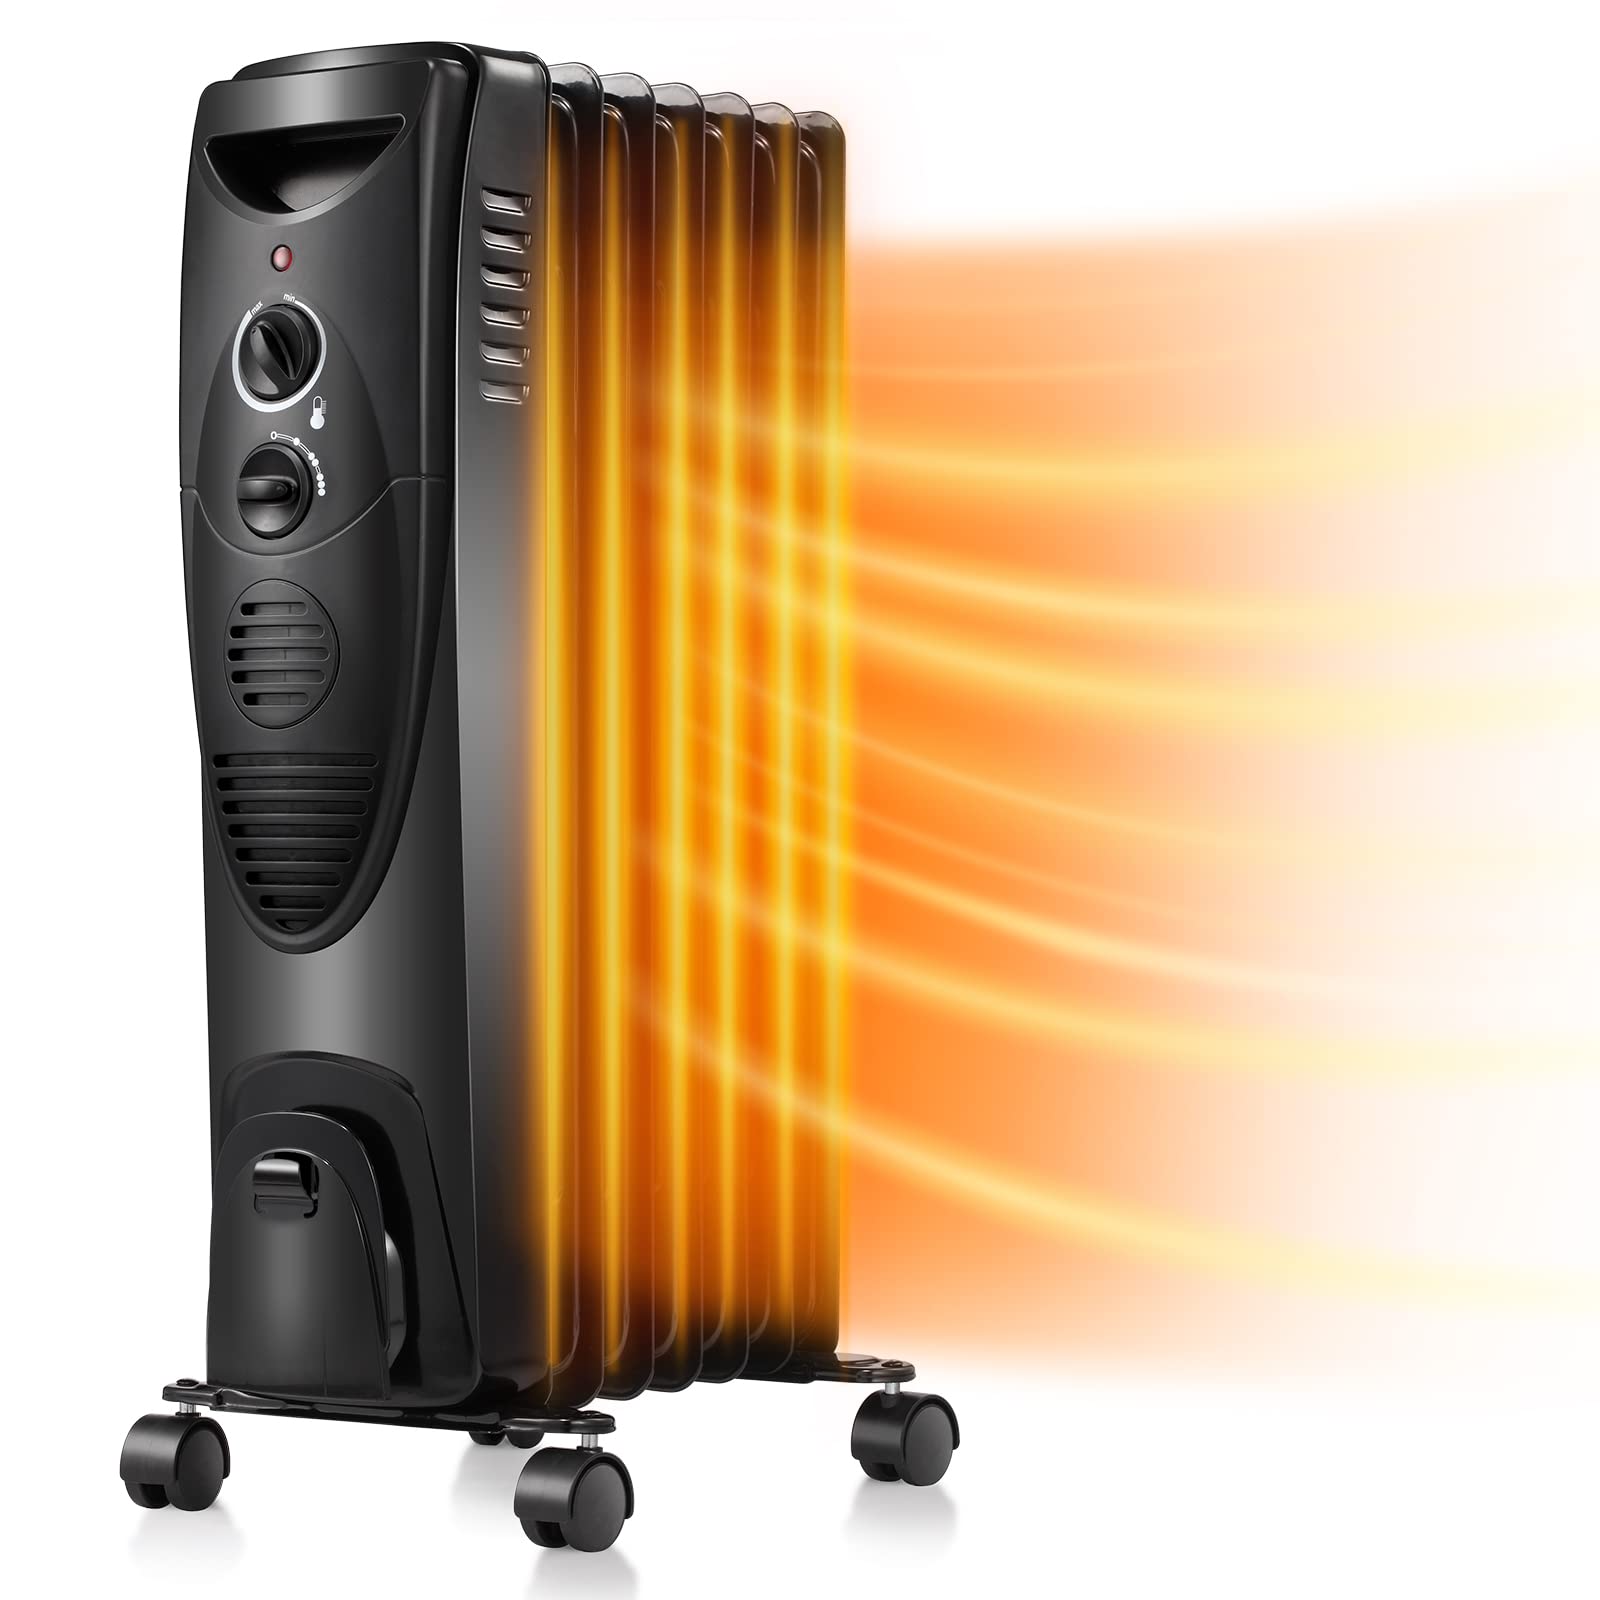 Kismile Oil-Filled Radiator, Quiet 1500W, Heater with Indicator Lights, 3 Heat Settings, Portable Safety Features